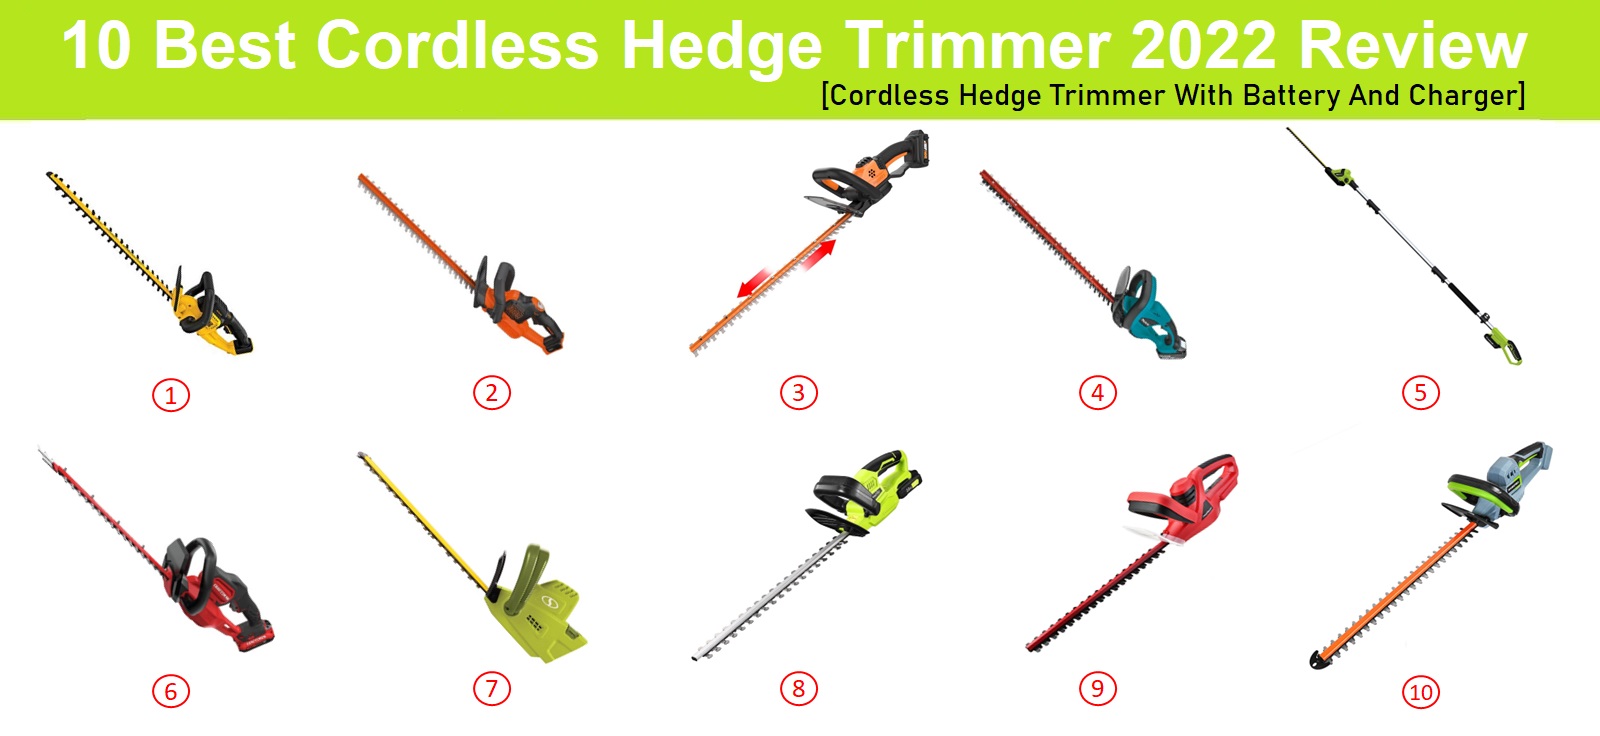 10 Best Cordless Hedge Trimmer 2022 Review